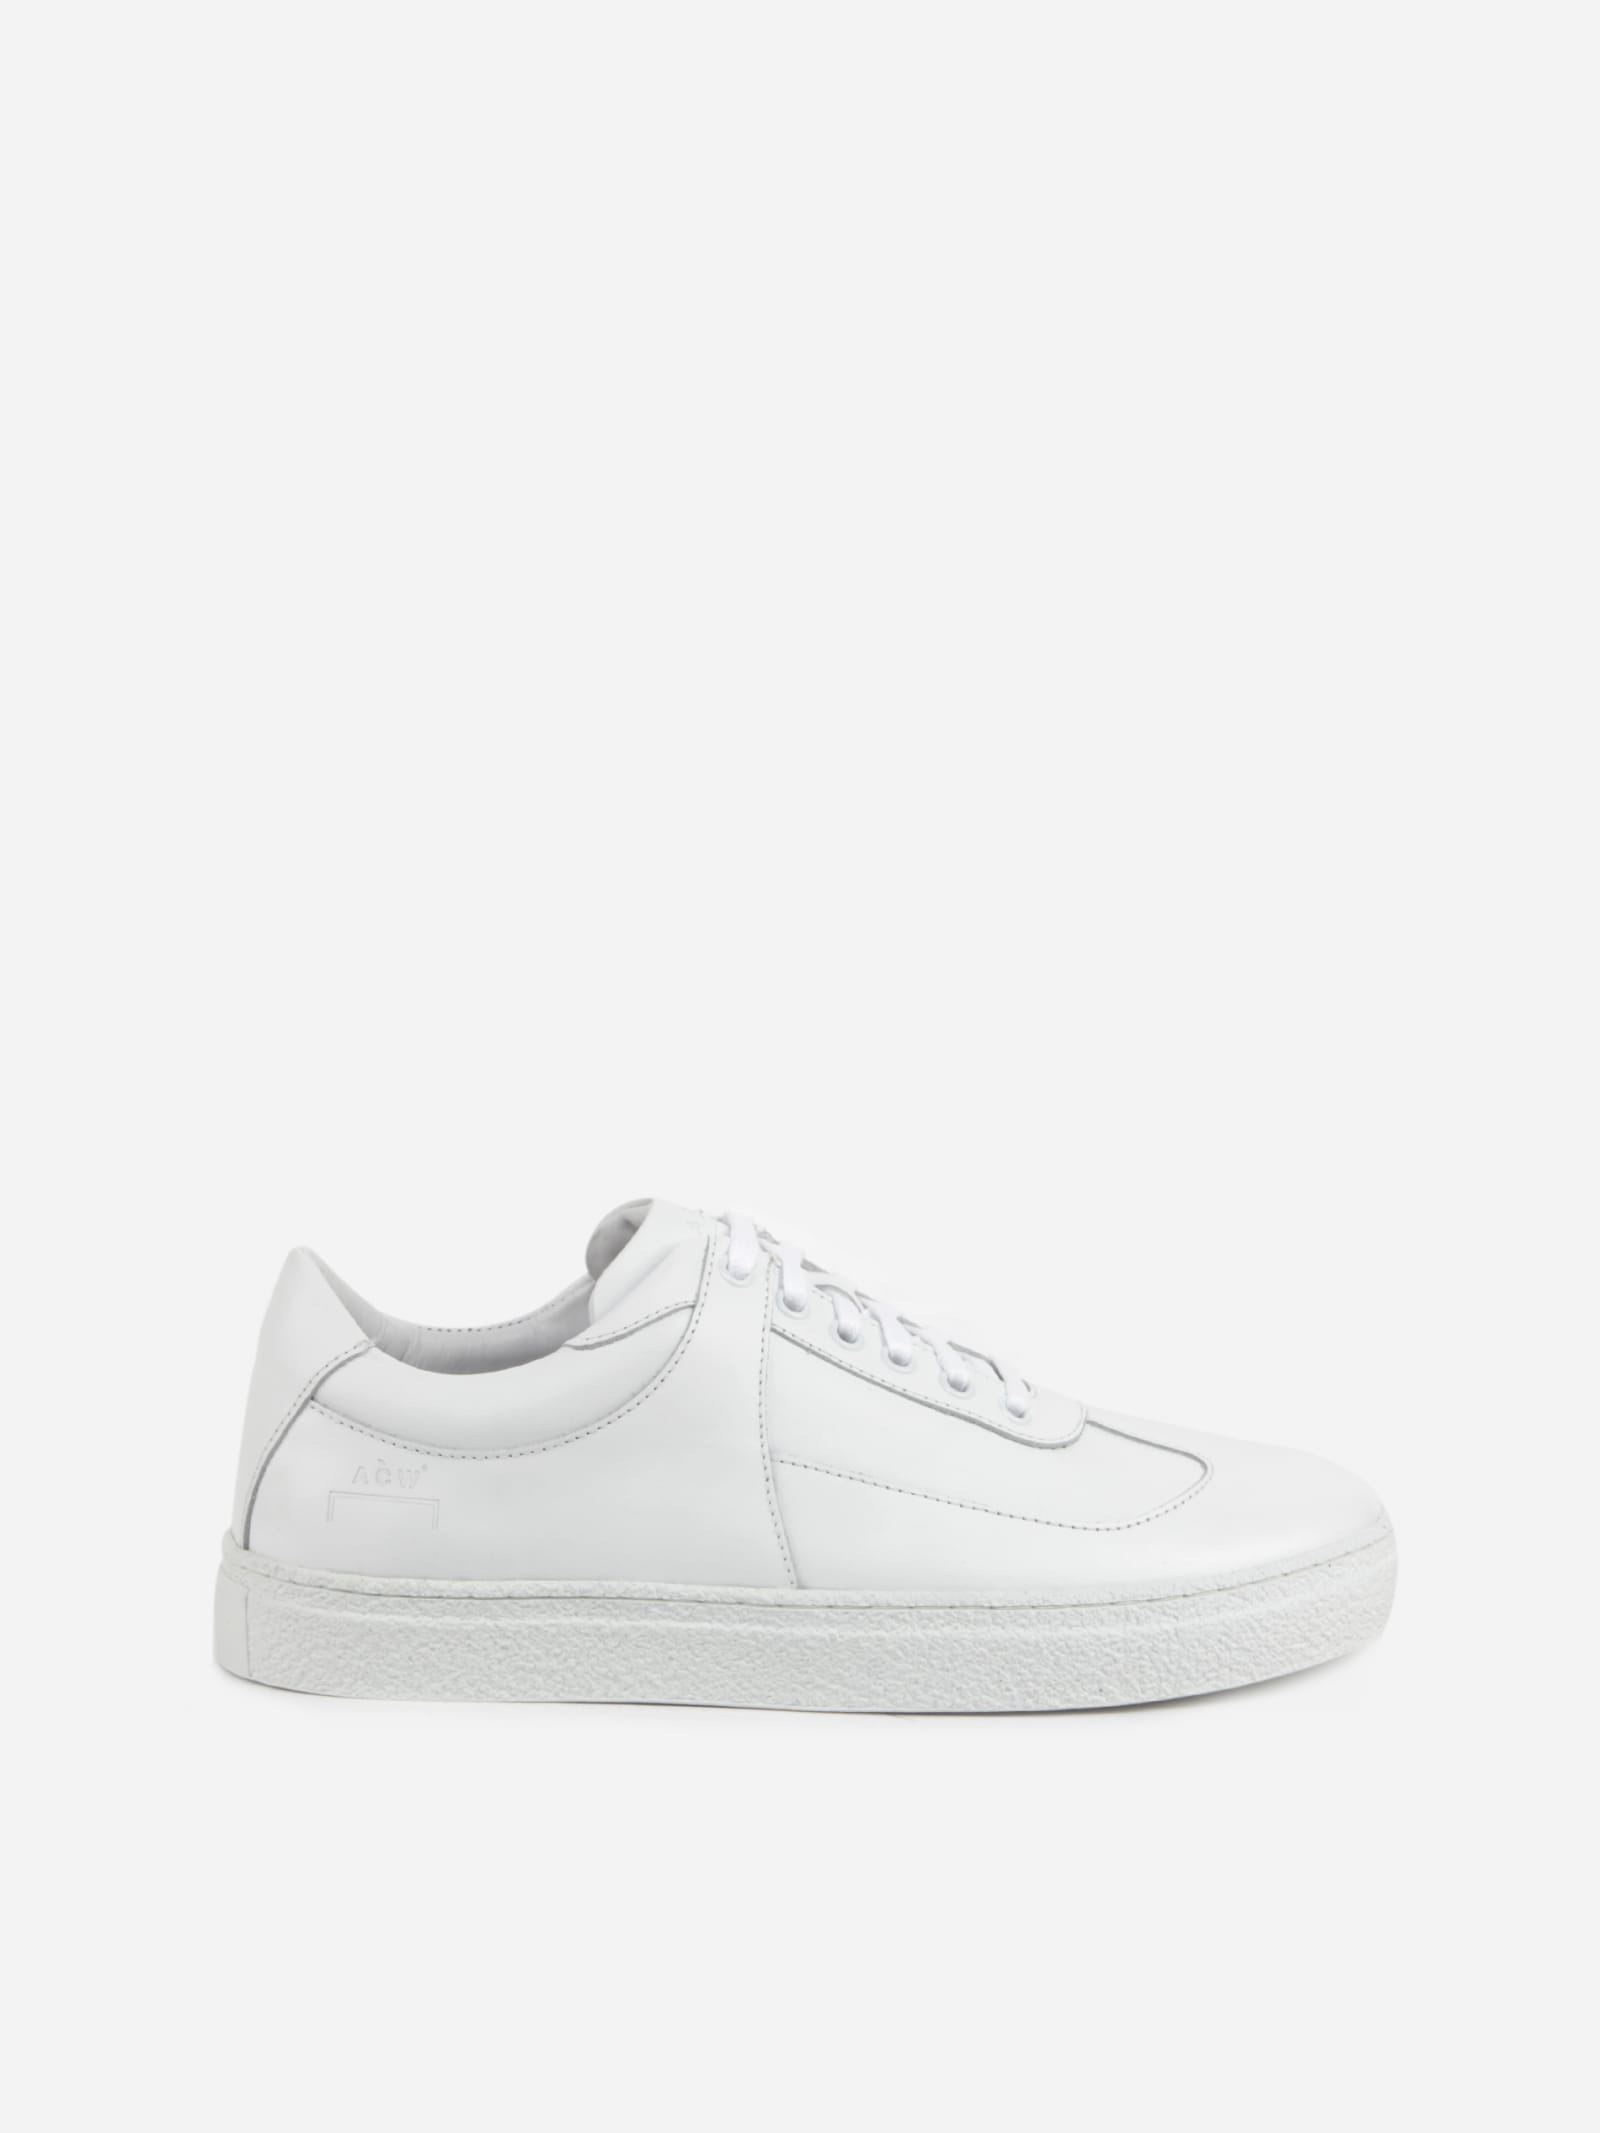 A-COLD-WALL White Leather Sneakers With Logo